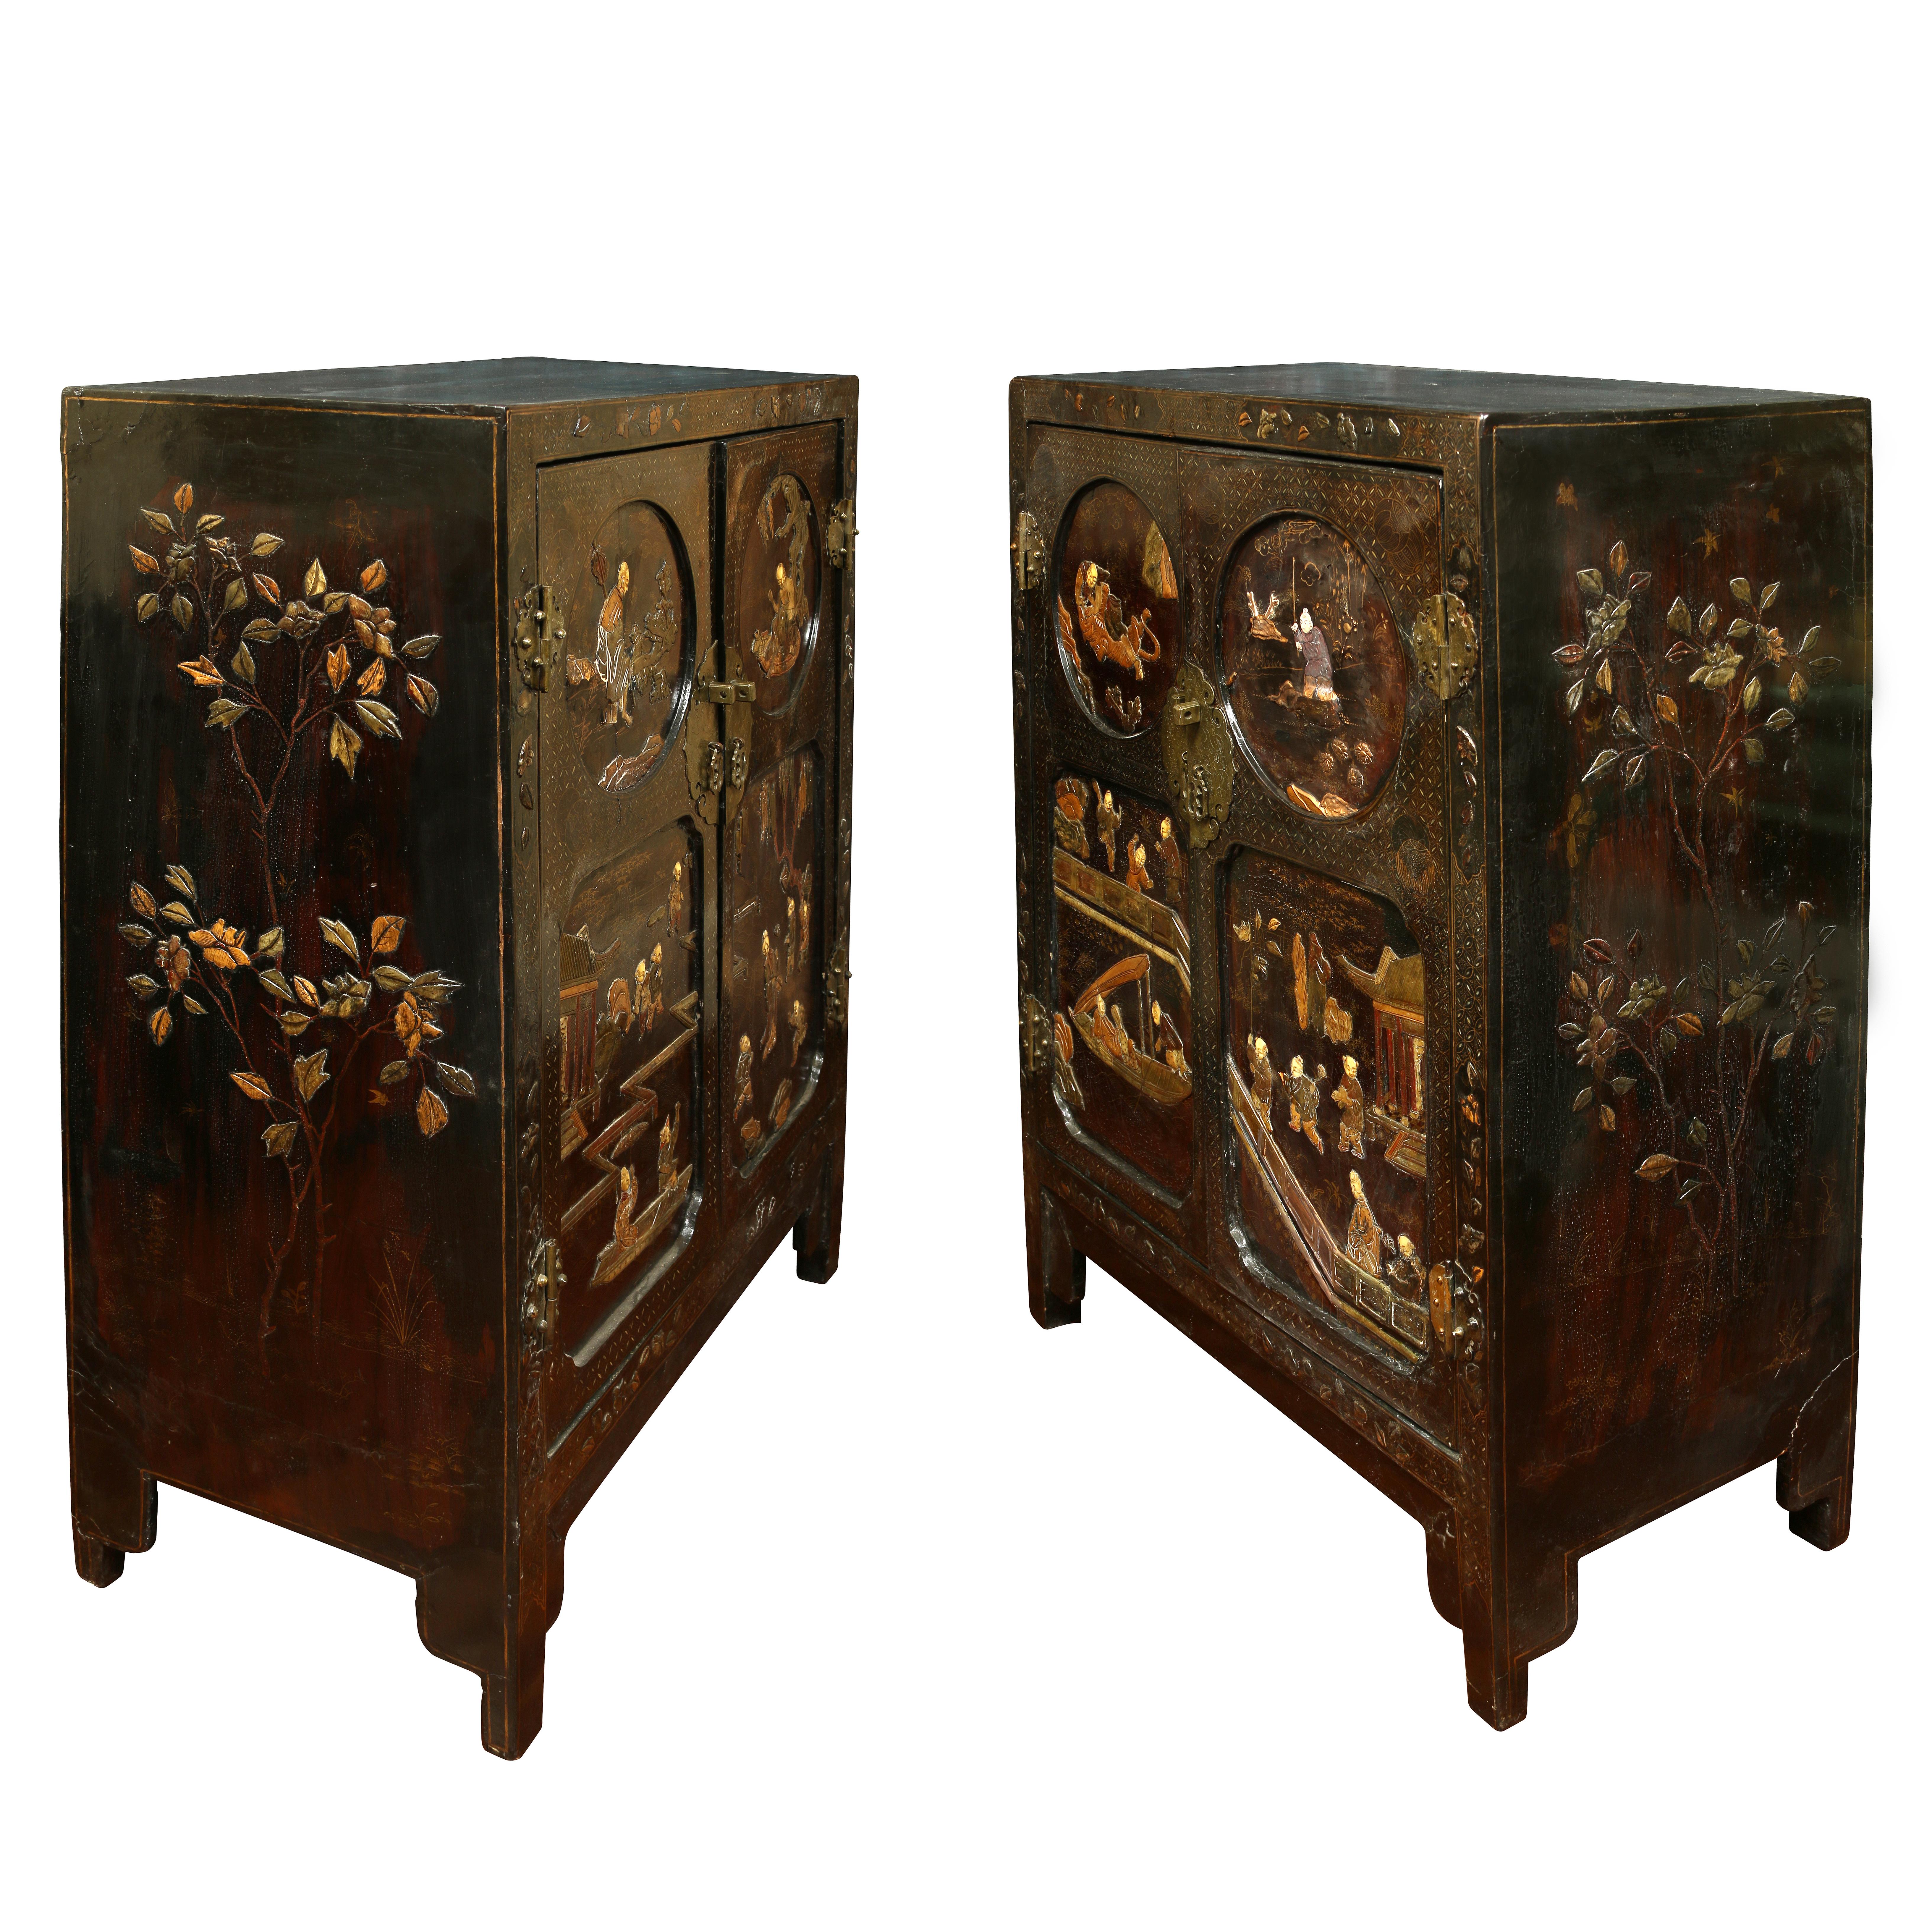 A very special pair of Asian Coromandel cabinets. Each cabinet has two doors with scenic figural inset panel.